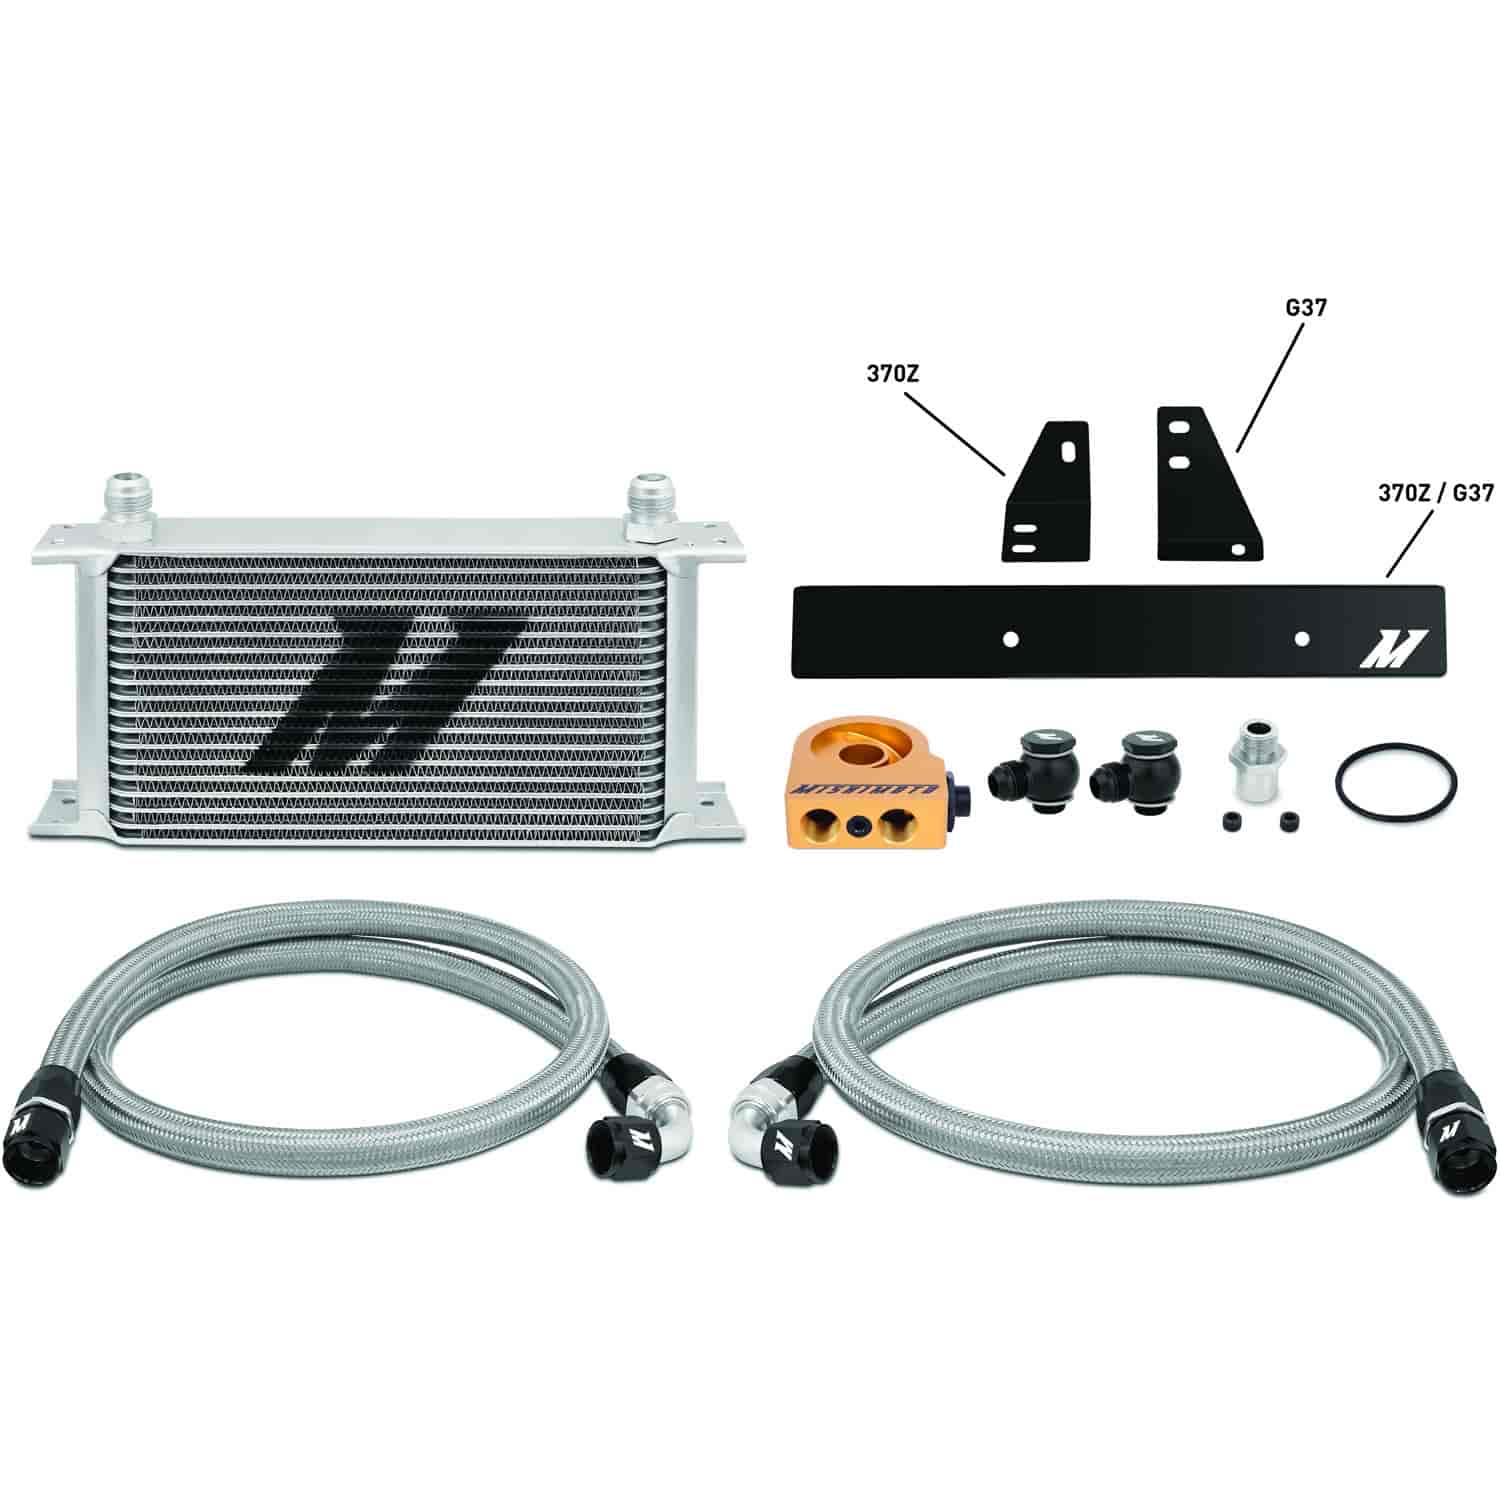 Nissan 370Z/ Infiniti G37 Coupe only Thermostatic Oil Cooler Kit - MFG Part No. MMOC-370Z-09T